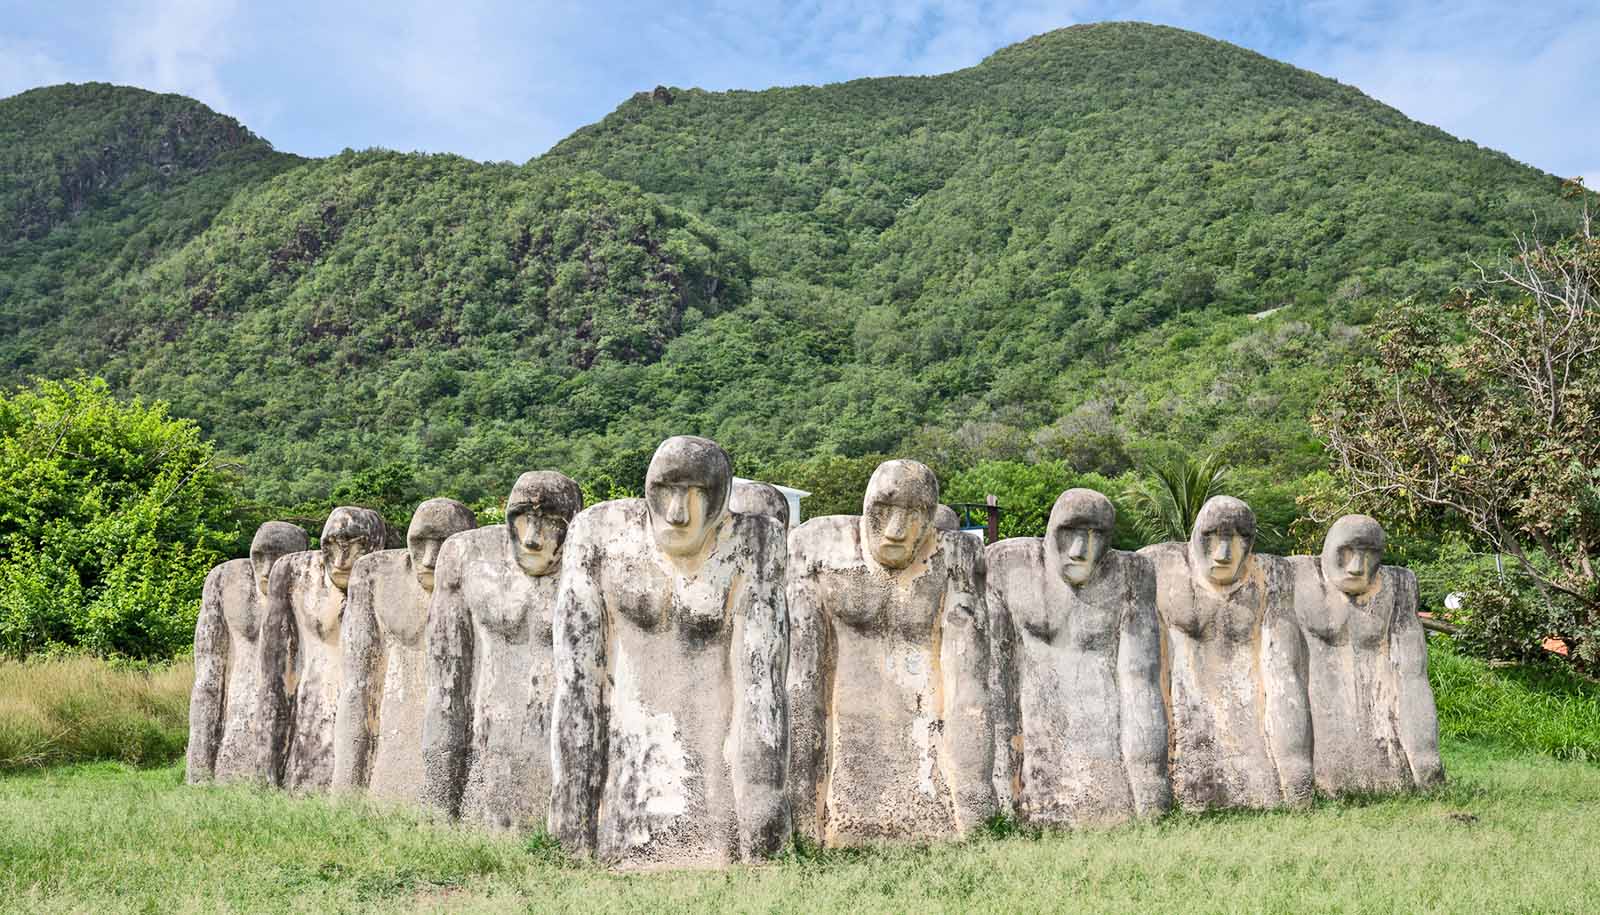 slavery memorial monument in martinique -- stone figures in formation appear to look downward